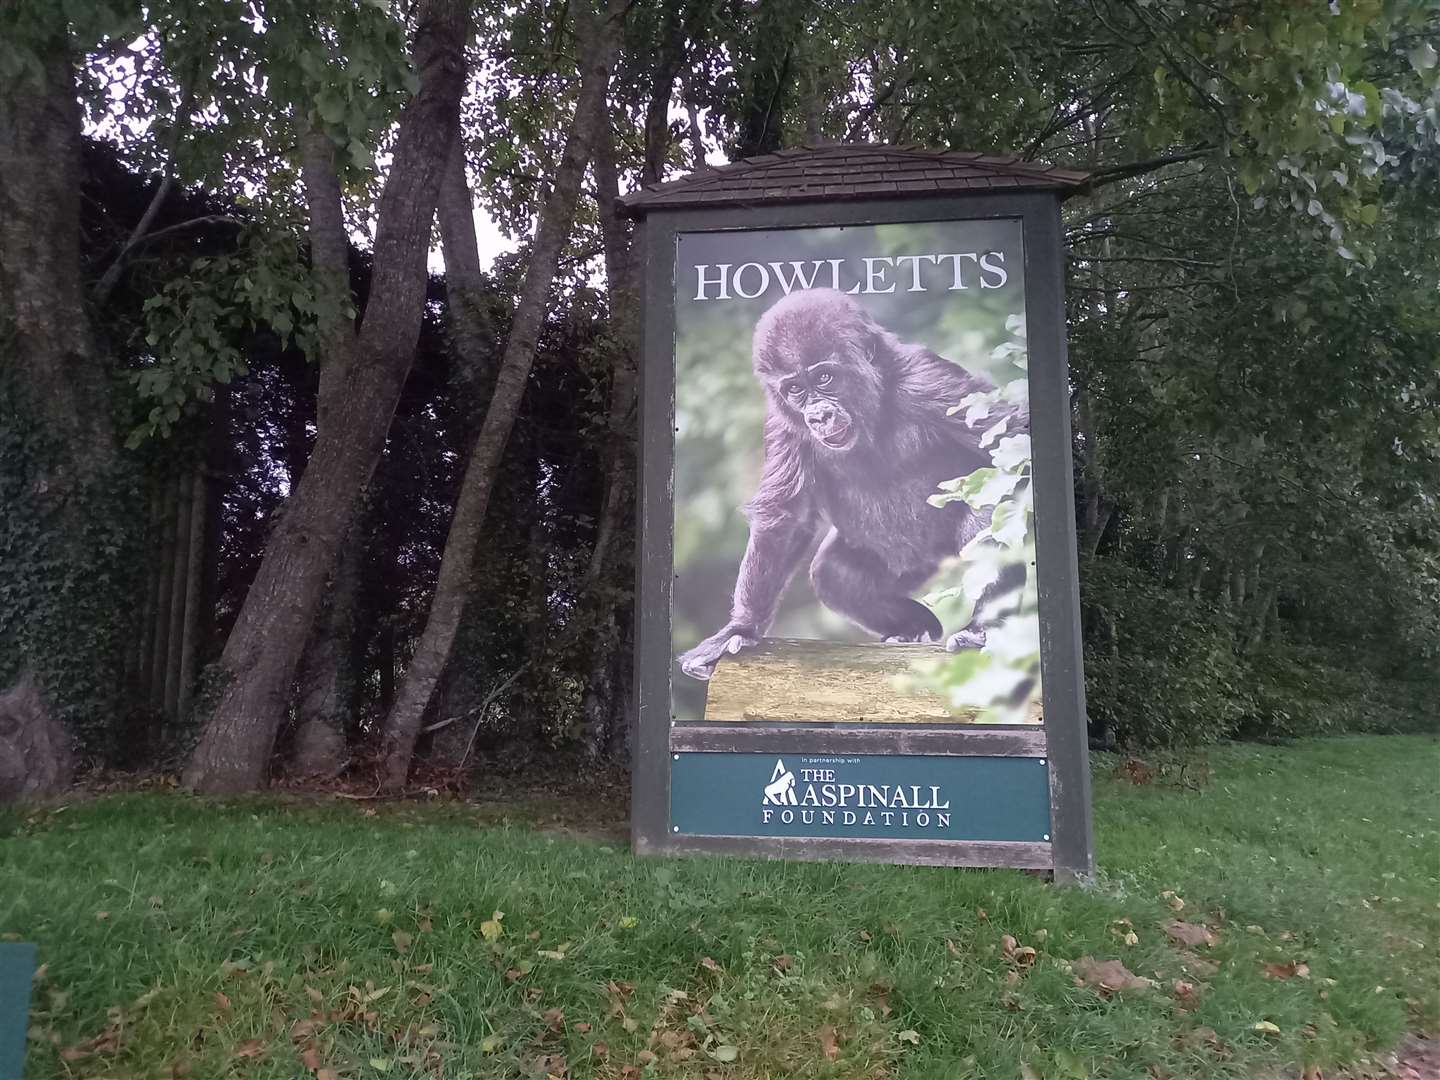 One of the star attractions at Howletts Wild Animal Park will remain out of public view for the foreseeable future